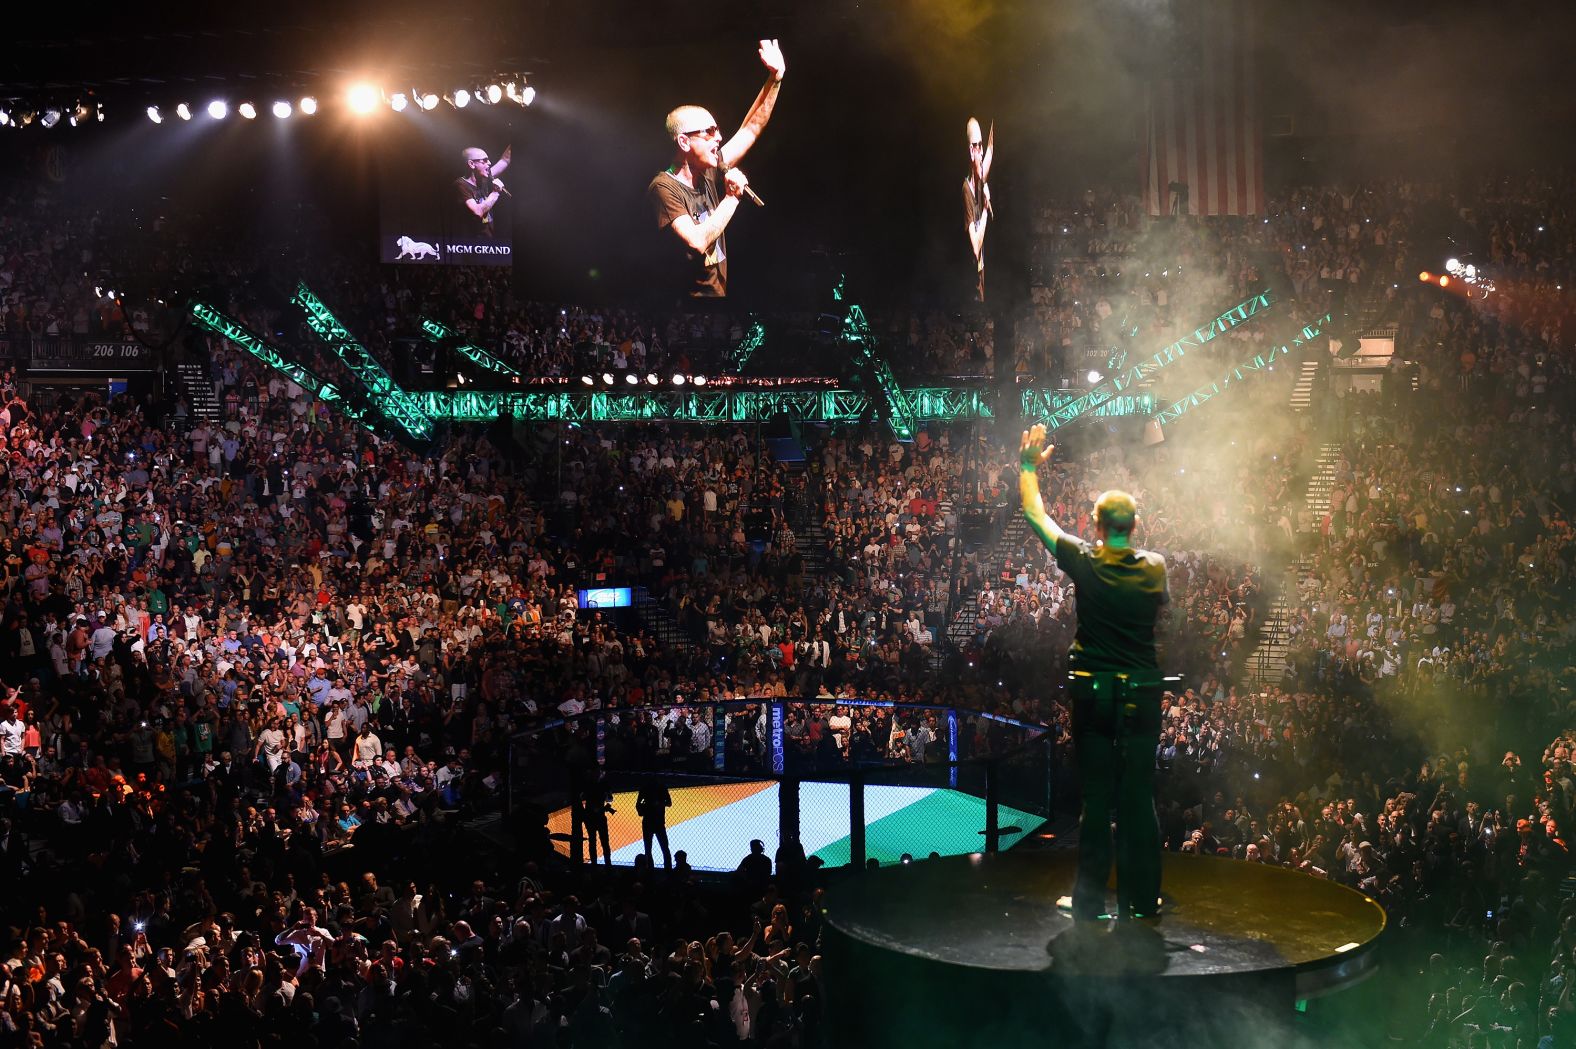 O'Connor sings at a UFC event in Las Vegas in 2015. She performed the walkout song for Irish star Conor McGregor.